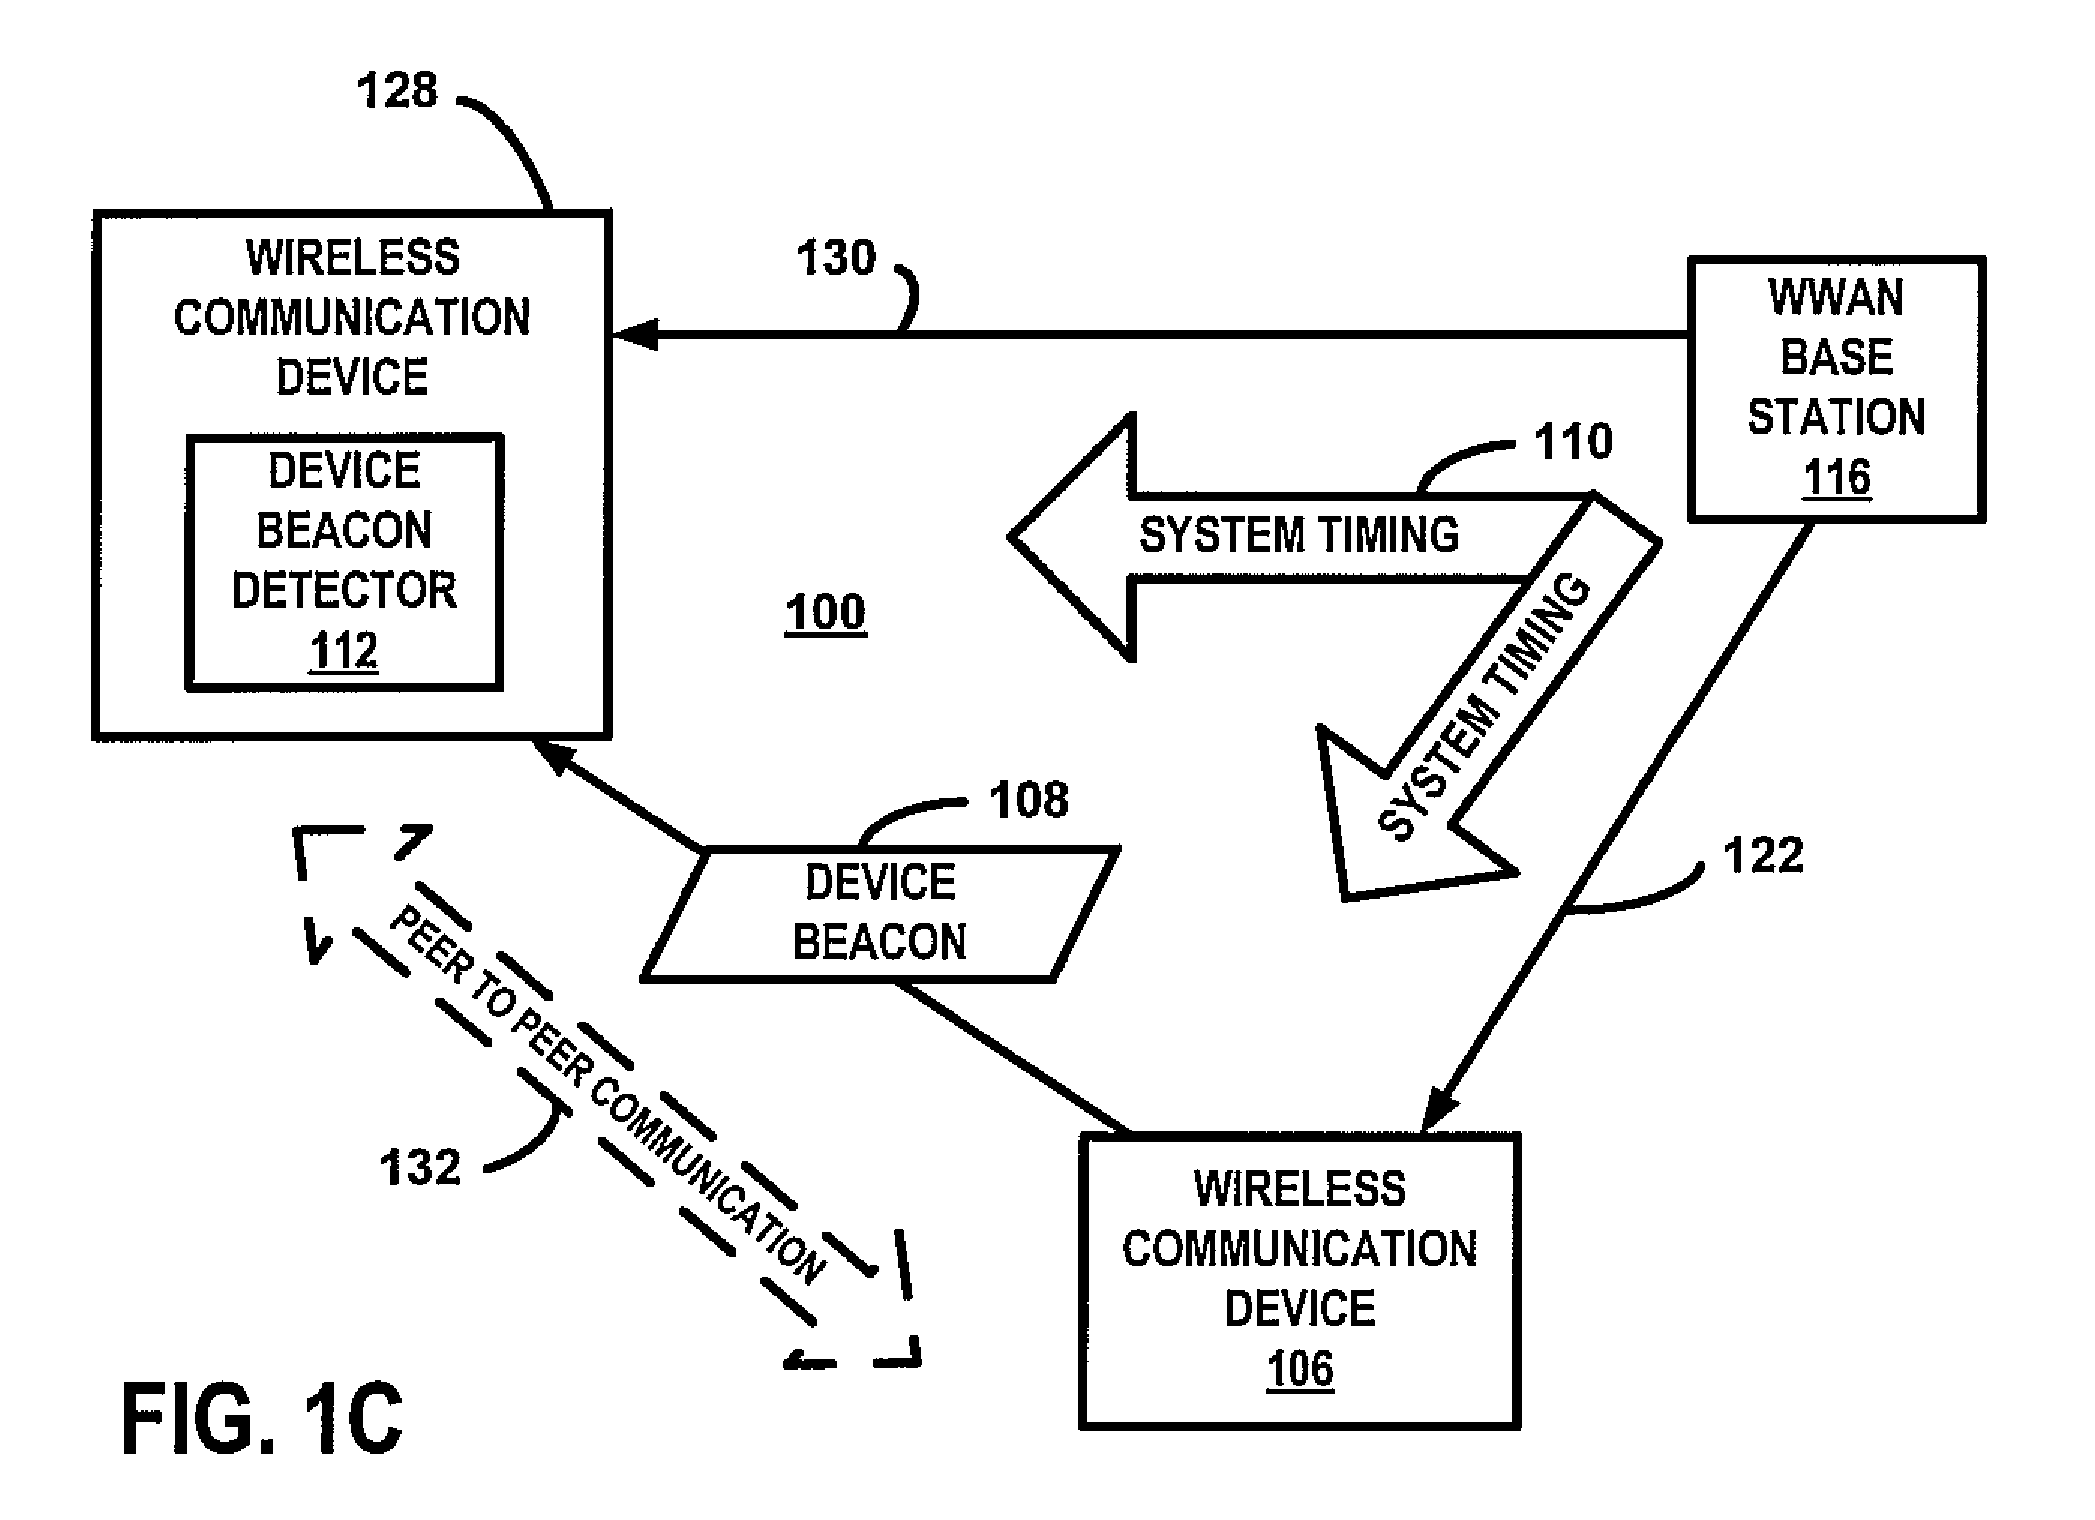 Device beacon for communication management for peer to peer communications